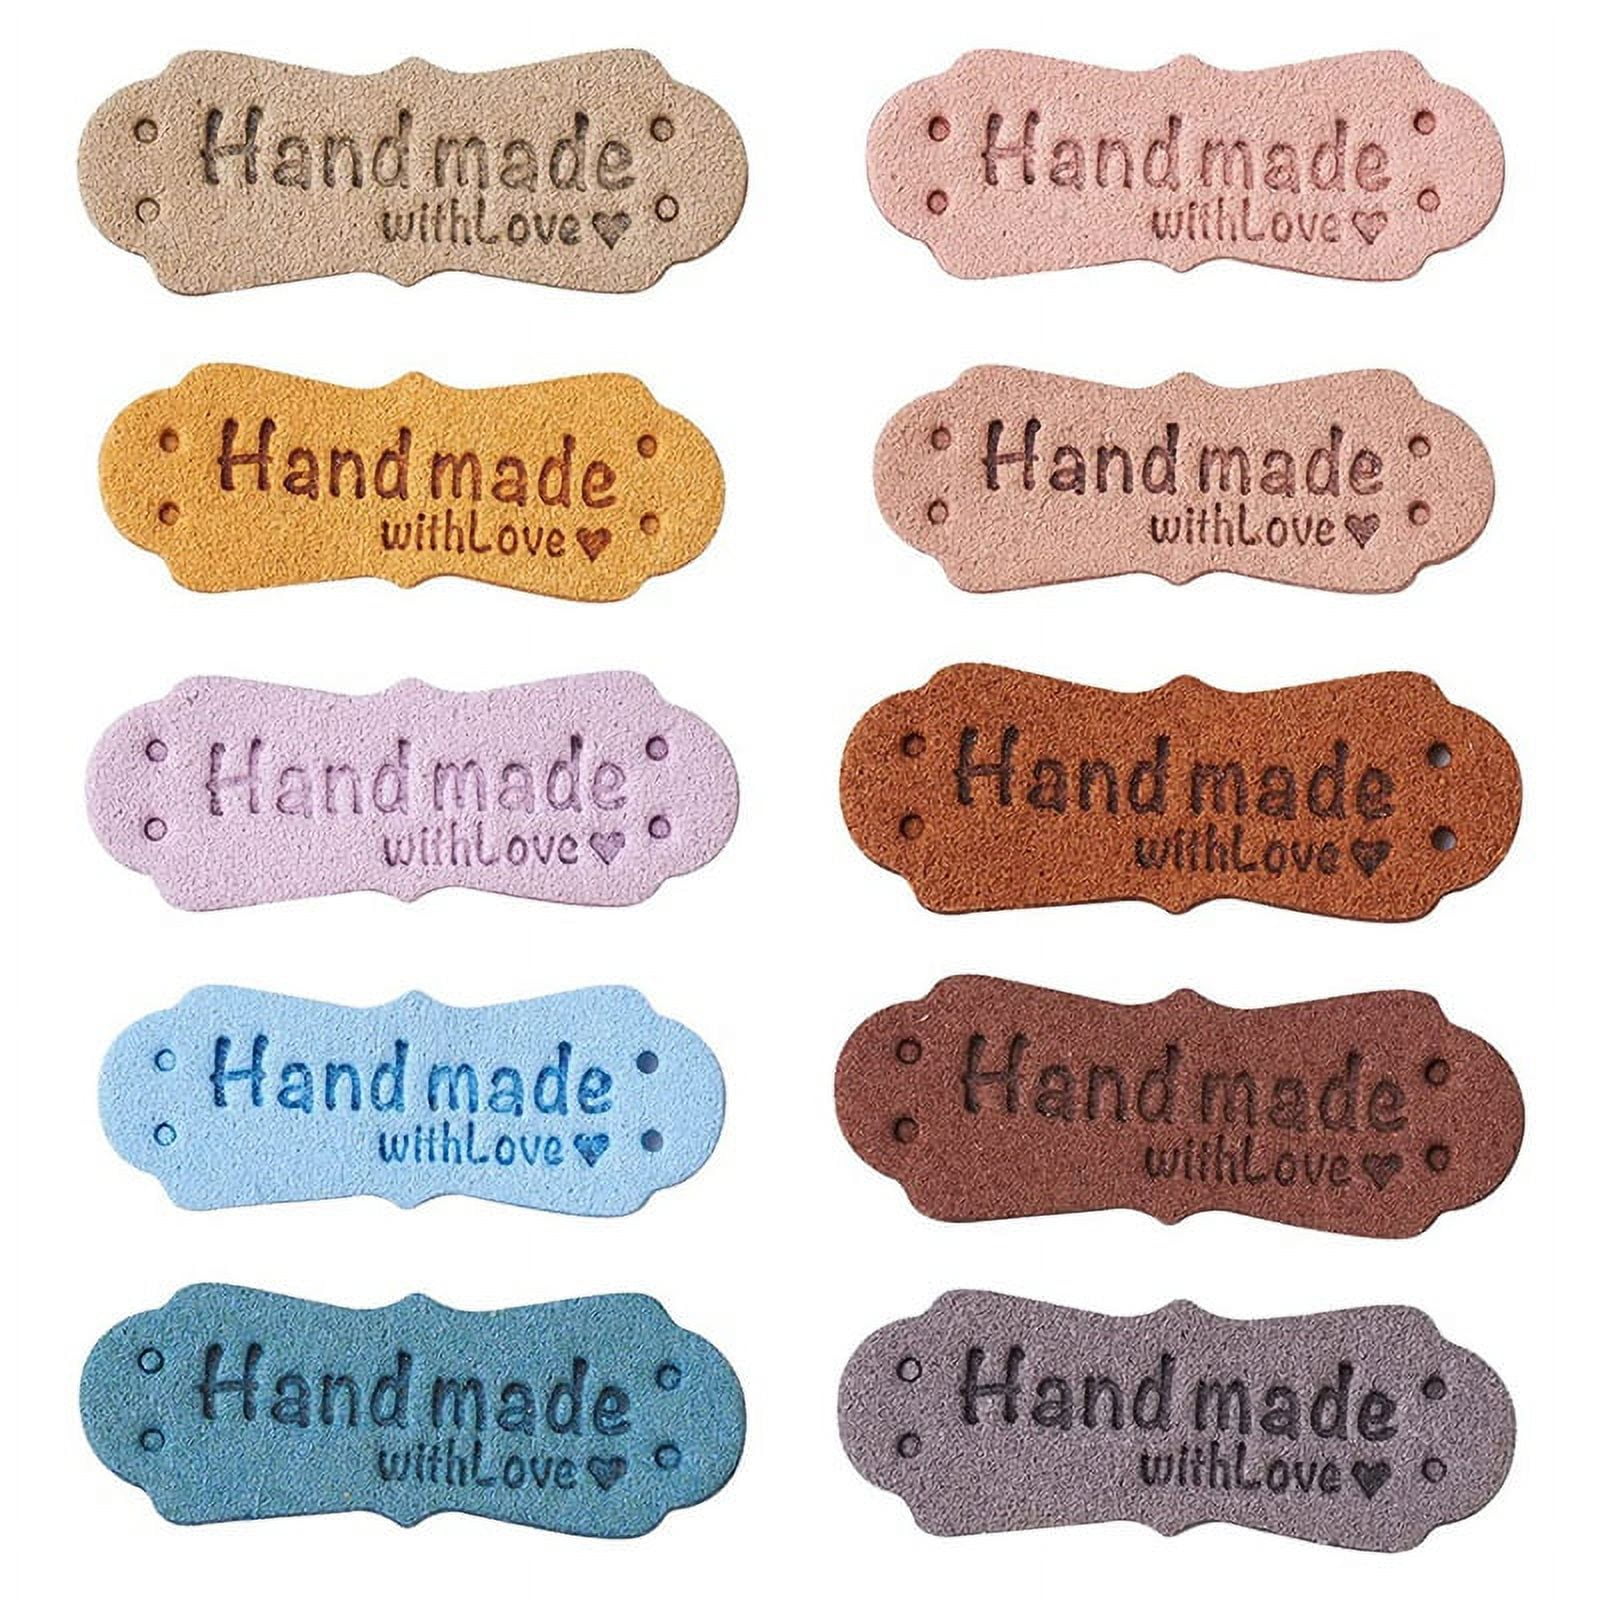 Personalised Handmade Tags Crochet, Tags for Handmade Items, Faux Leather  Tags, Labels for Handmade Items,Product Tags for Party